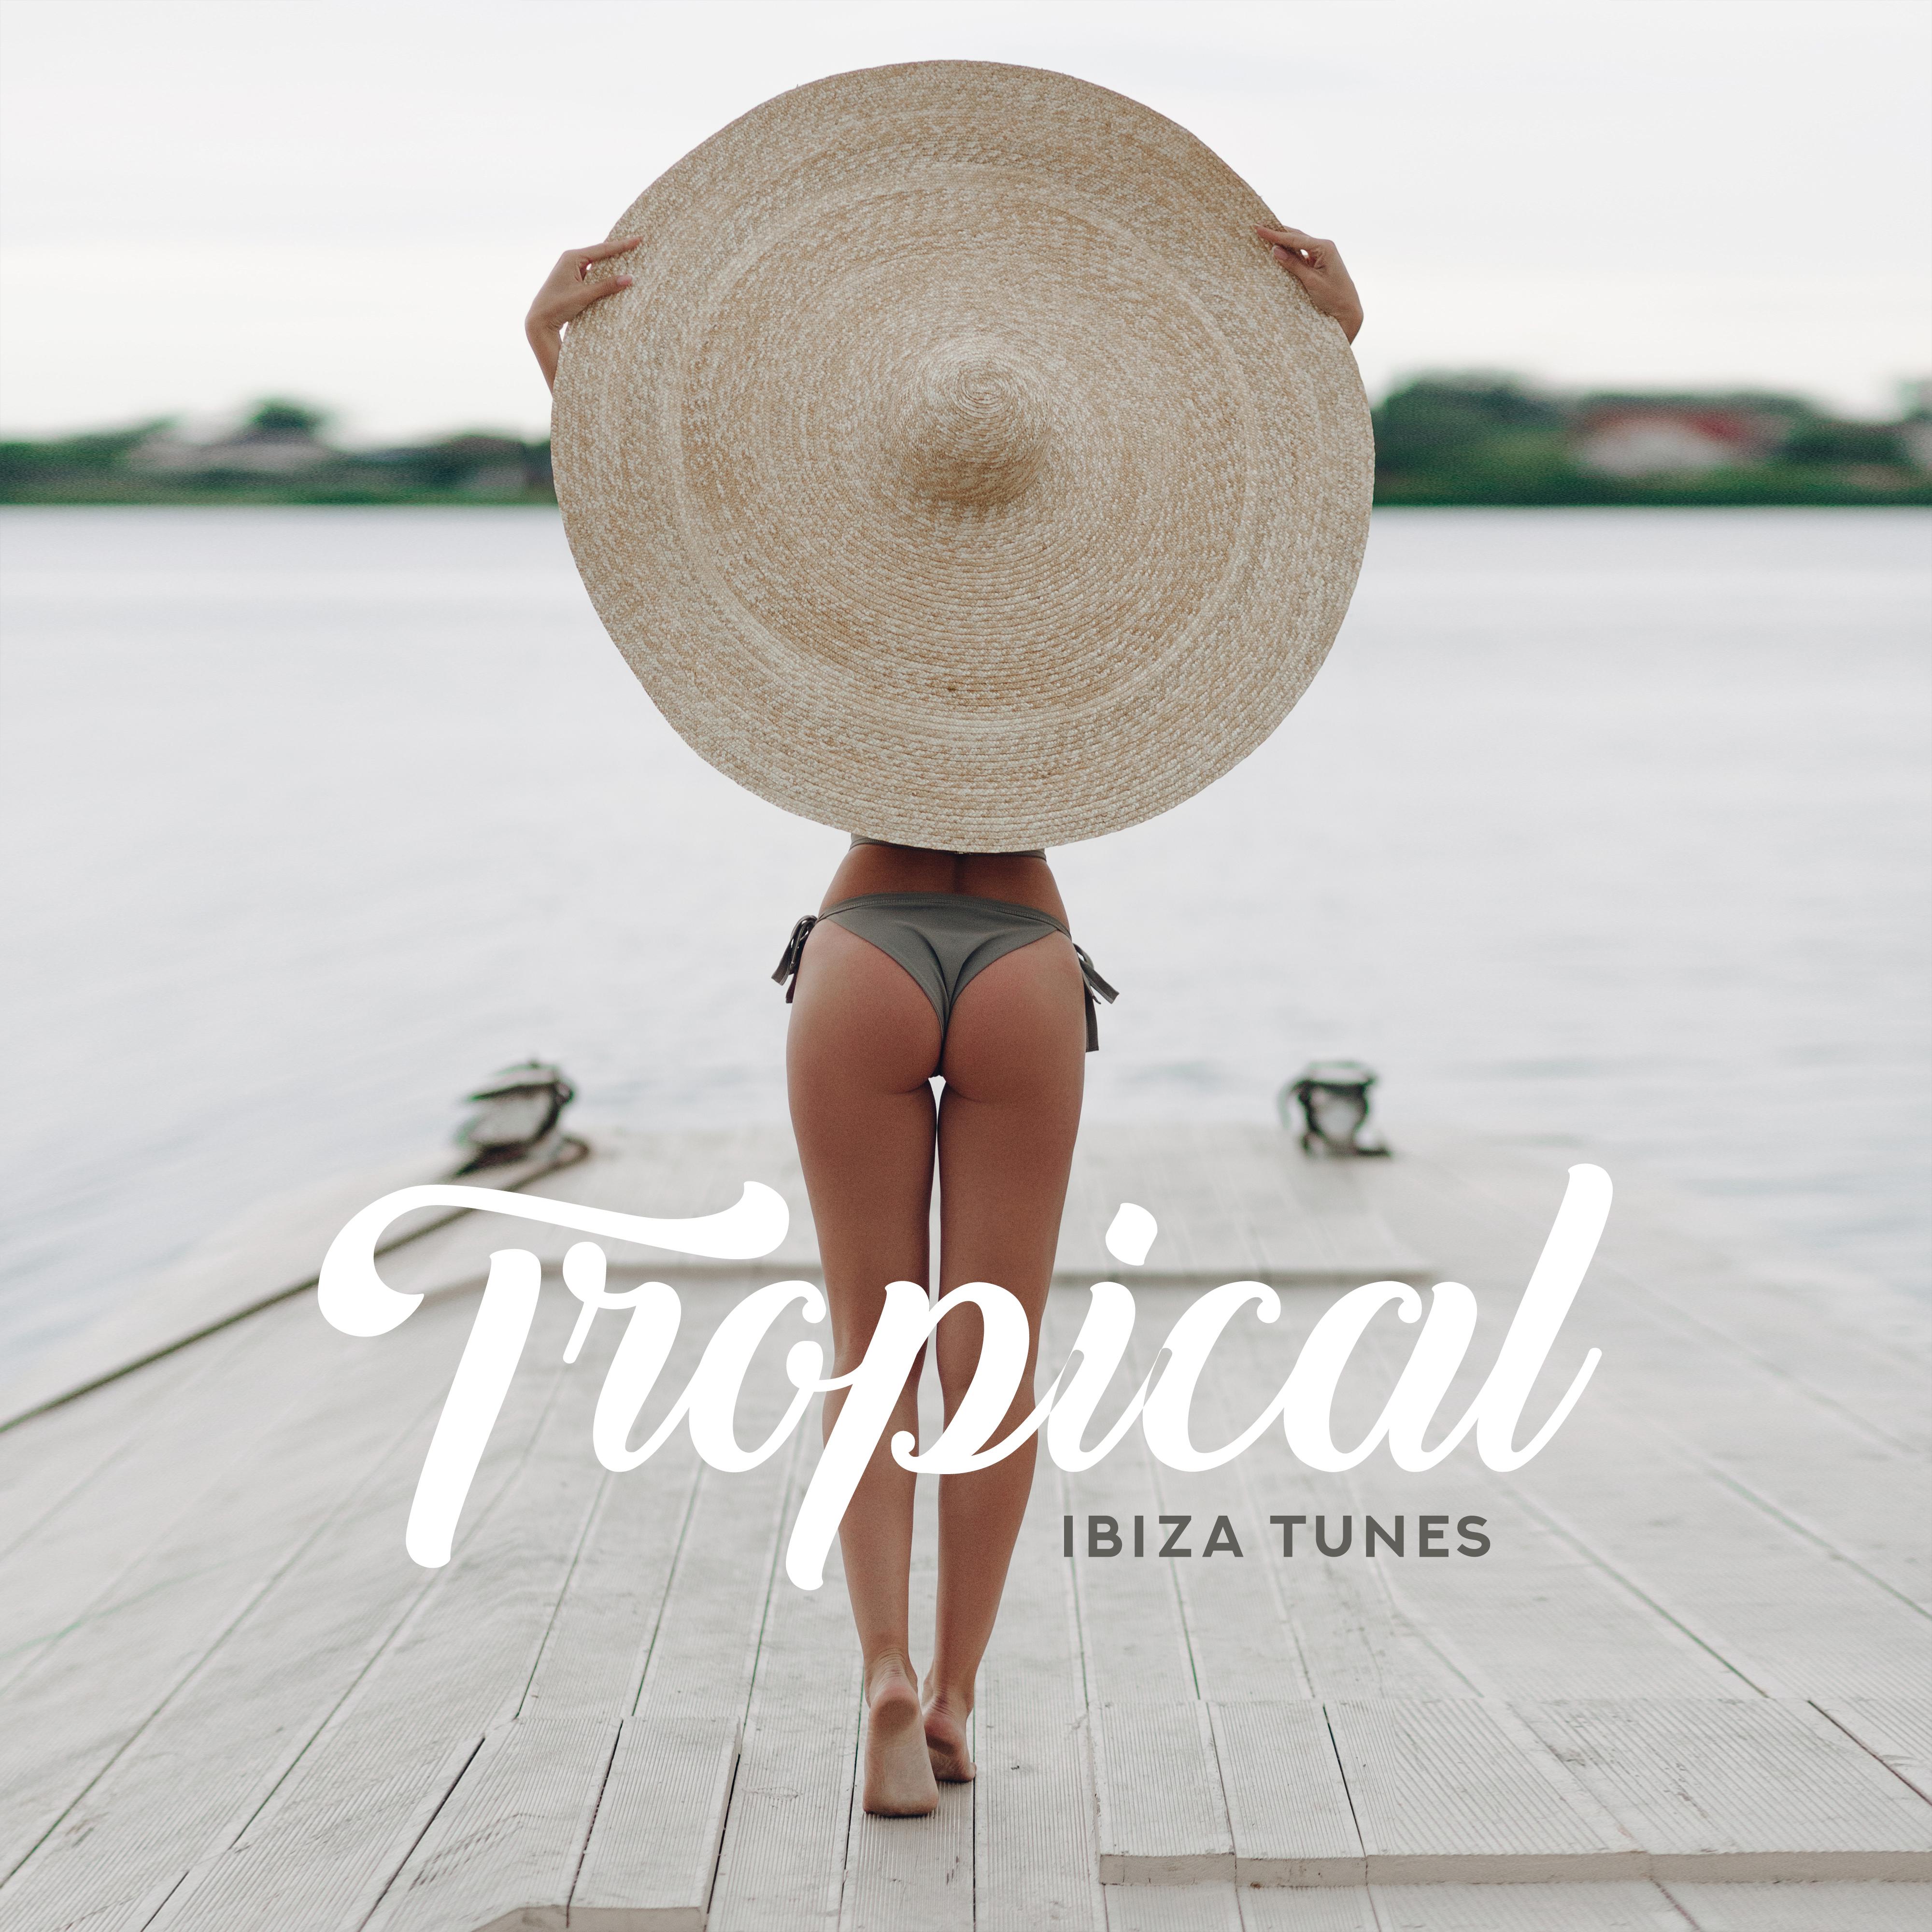 Tropical Ibiza Tunes – Sunny Ibiza, Relaxing Vibes, Vacation Songs, Music to Chill Out 2019